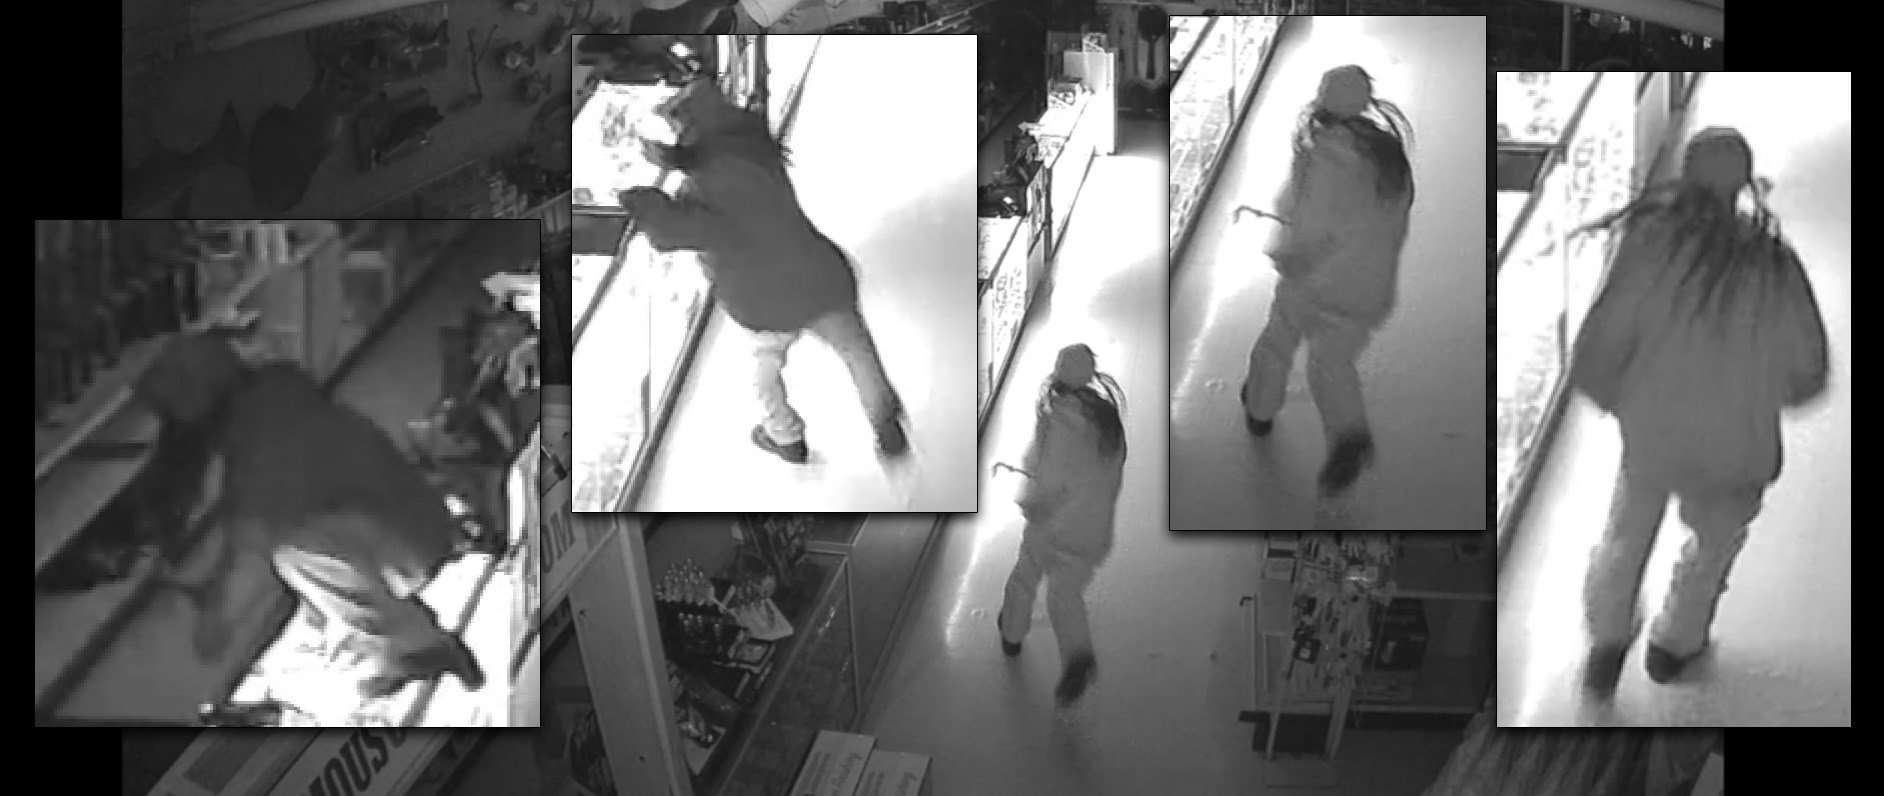 Reward offered for stolen firearms from an Ace Hardware in